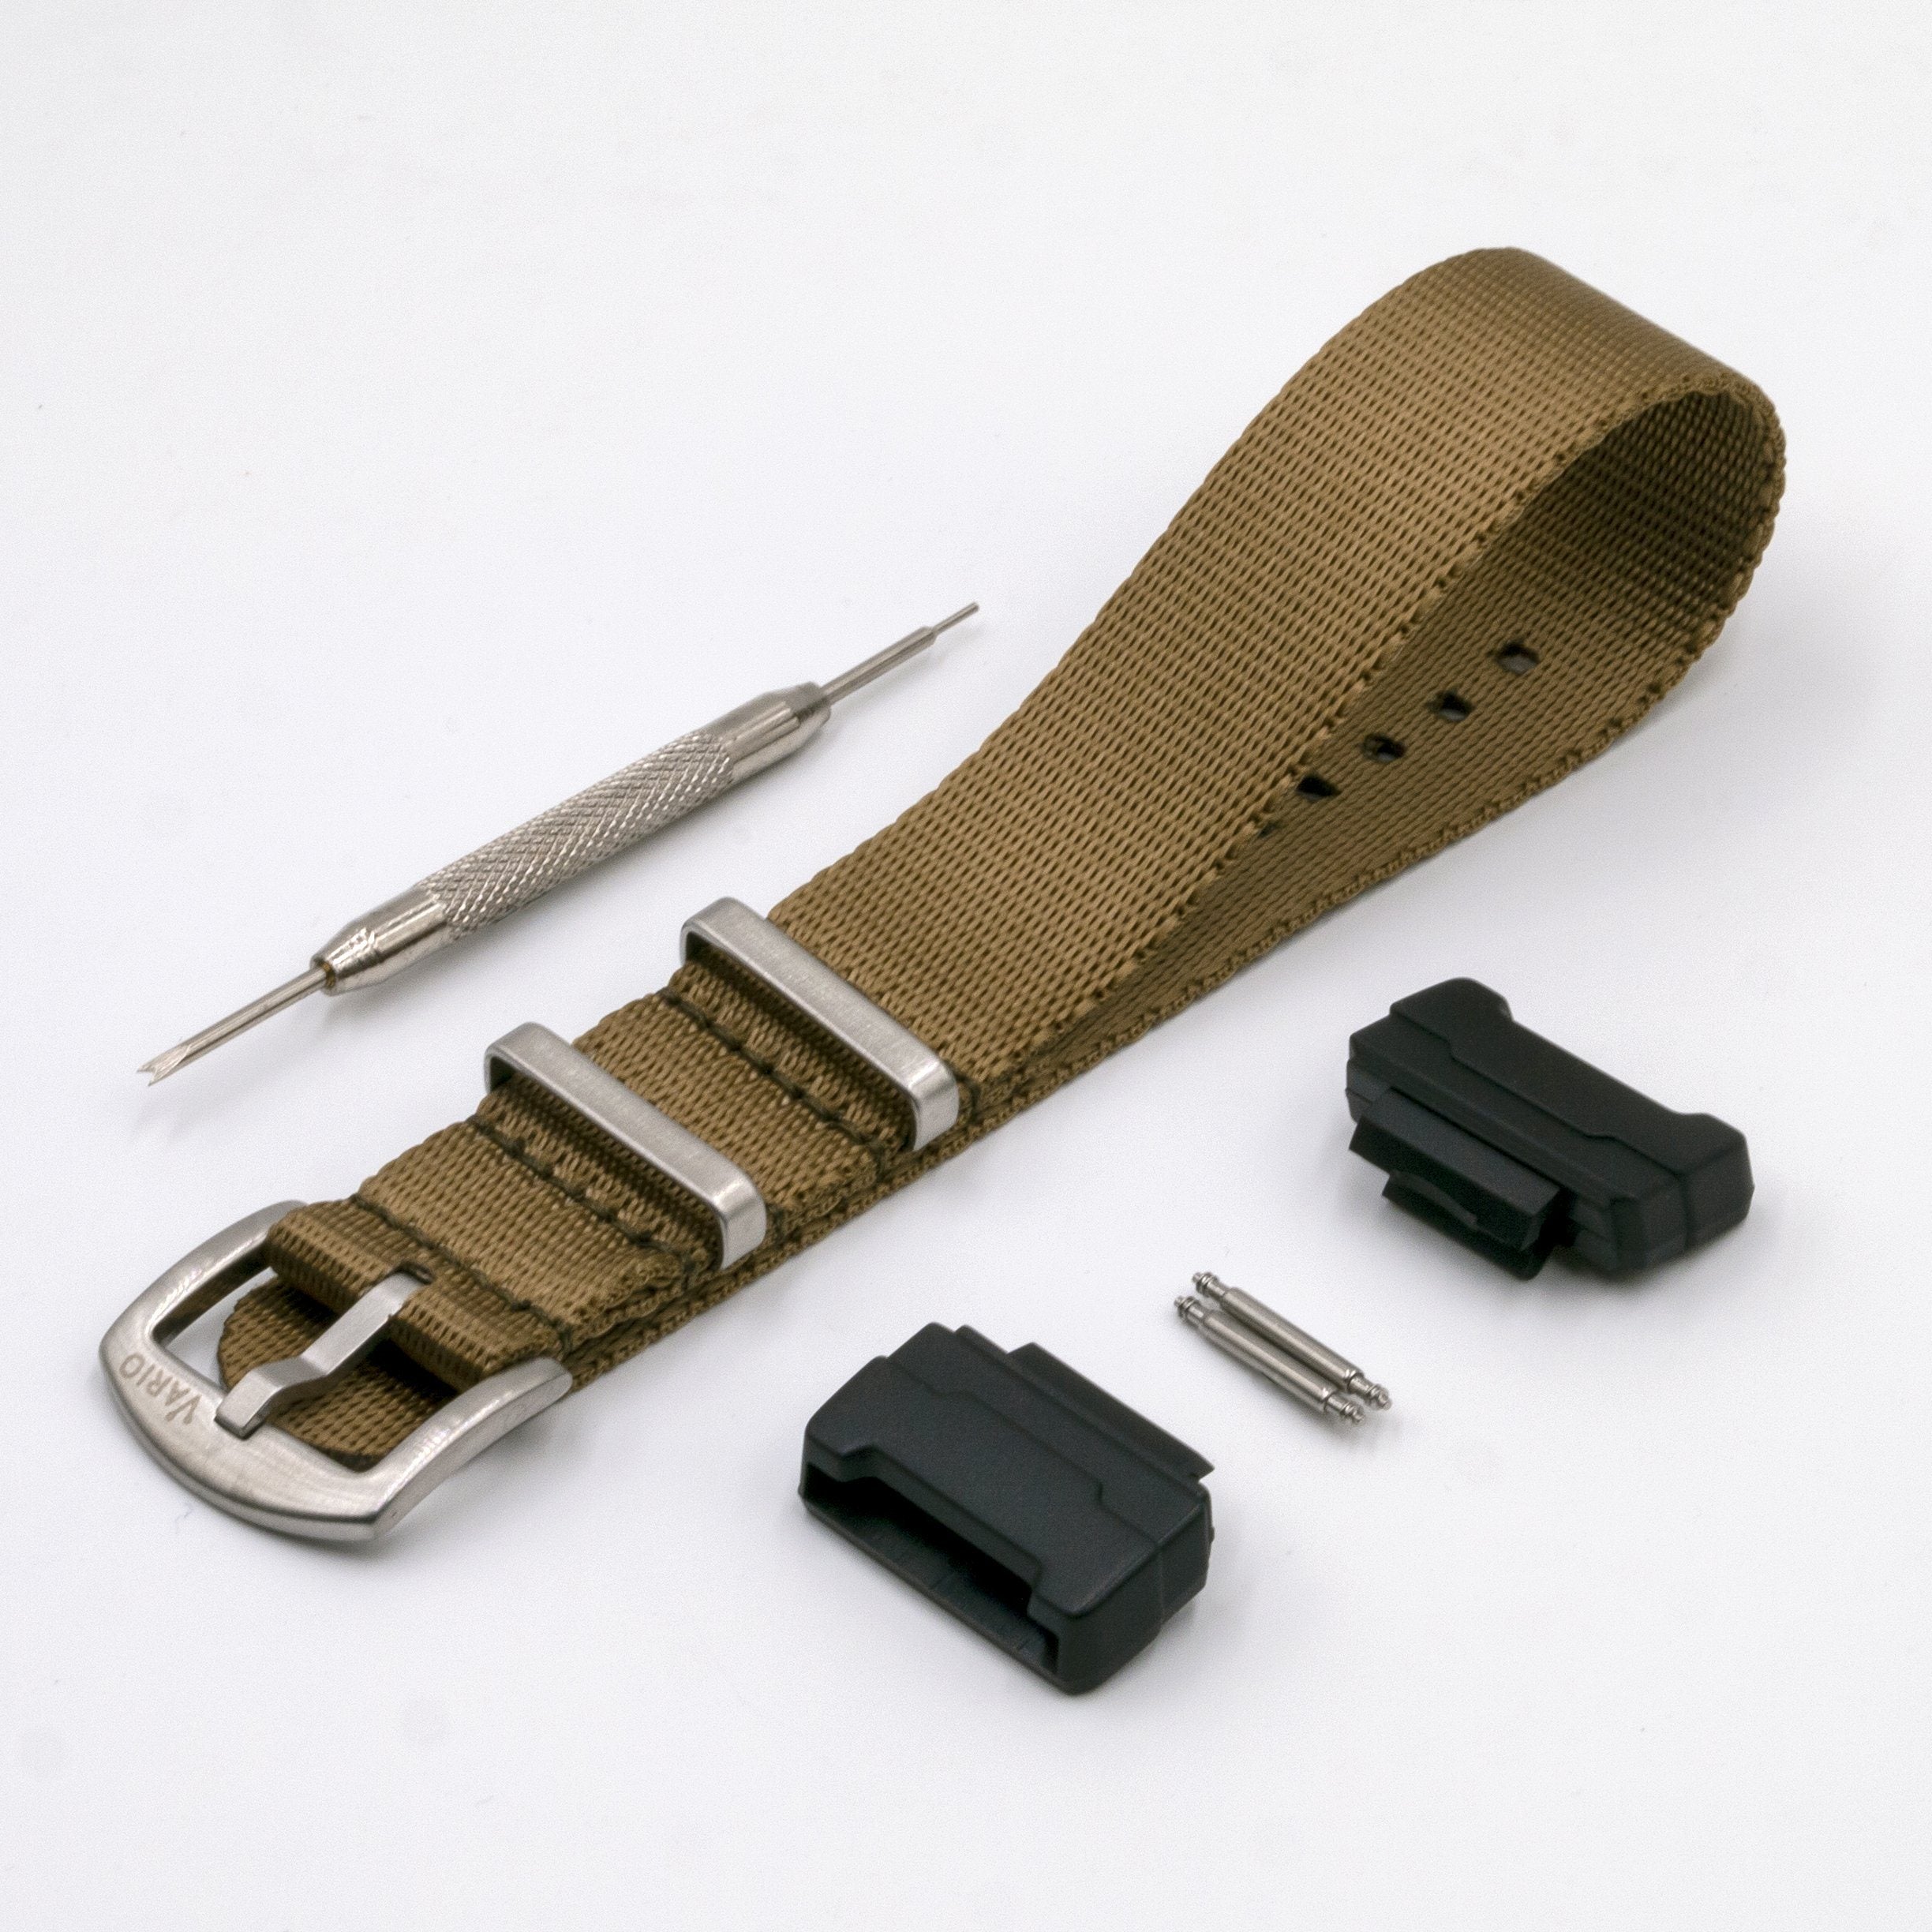 Seat Belt Khaki Brown Watch Strap with G-Shock Compatible Adapter and Spring Bar Tool